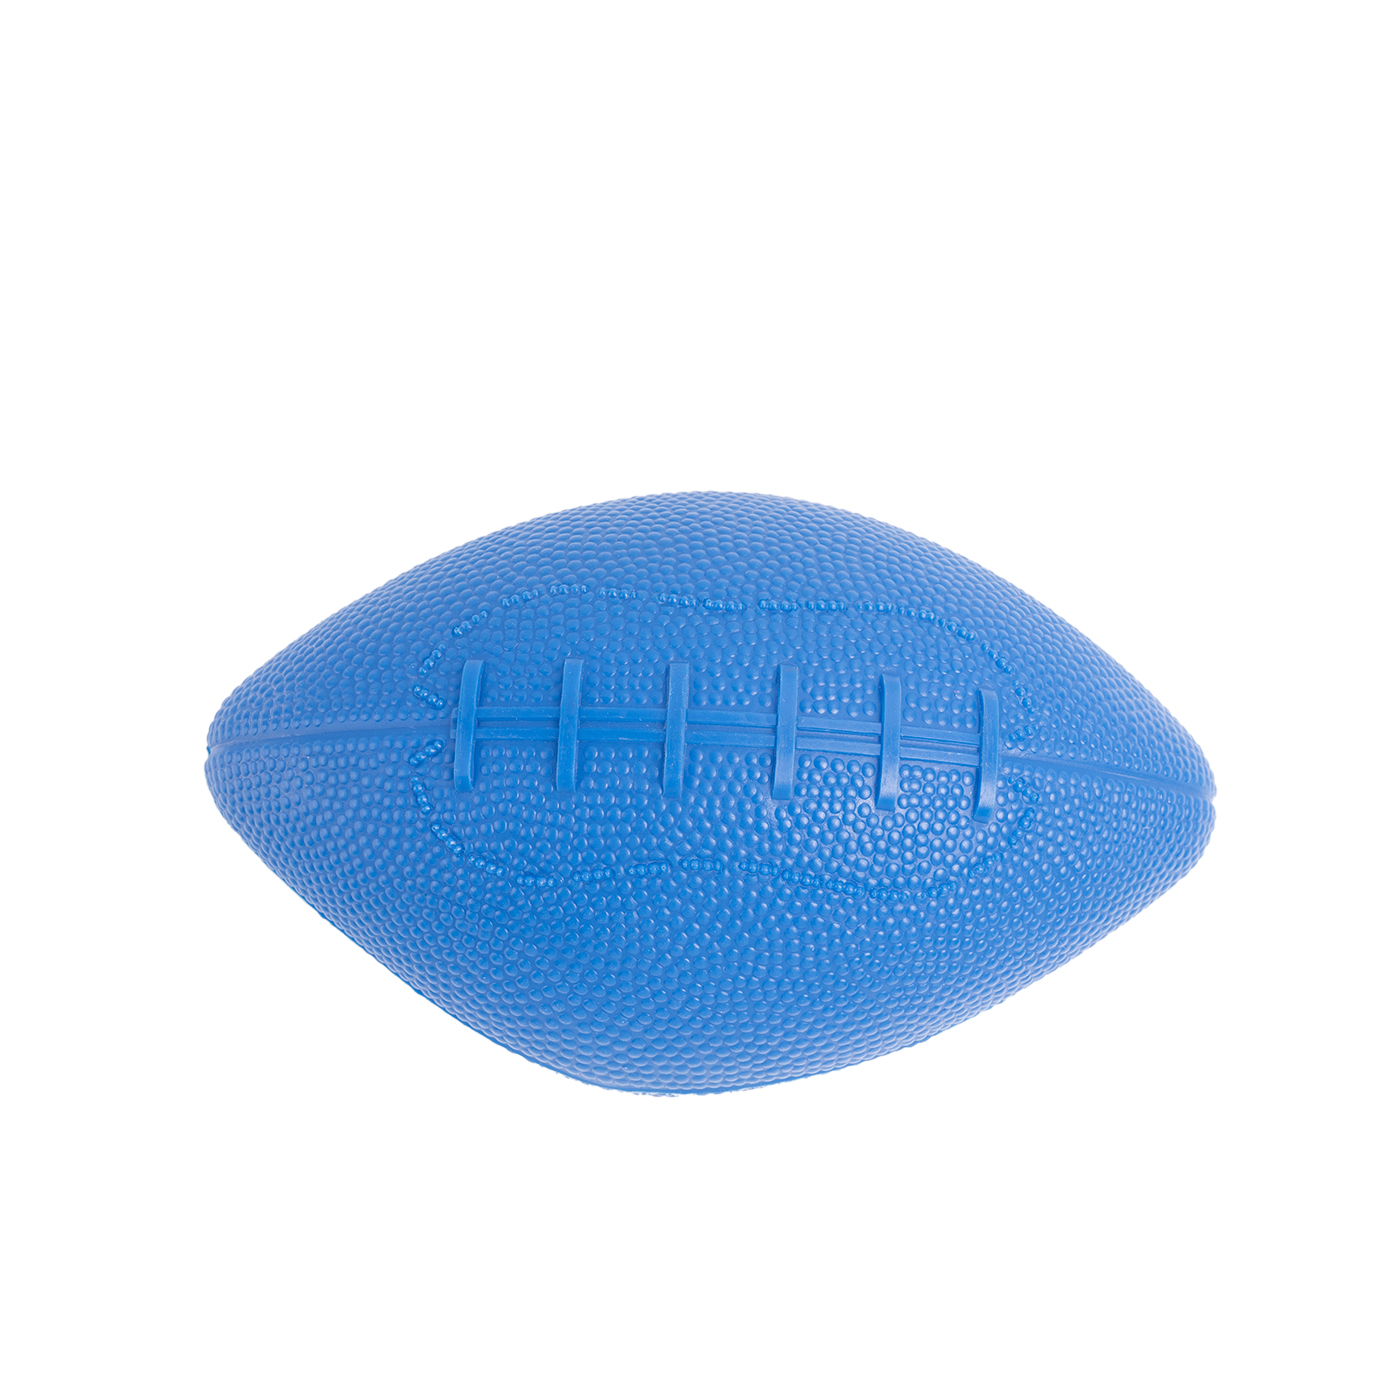 Rugby Stress Release Squeeze Toy2